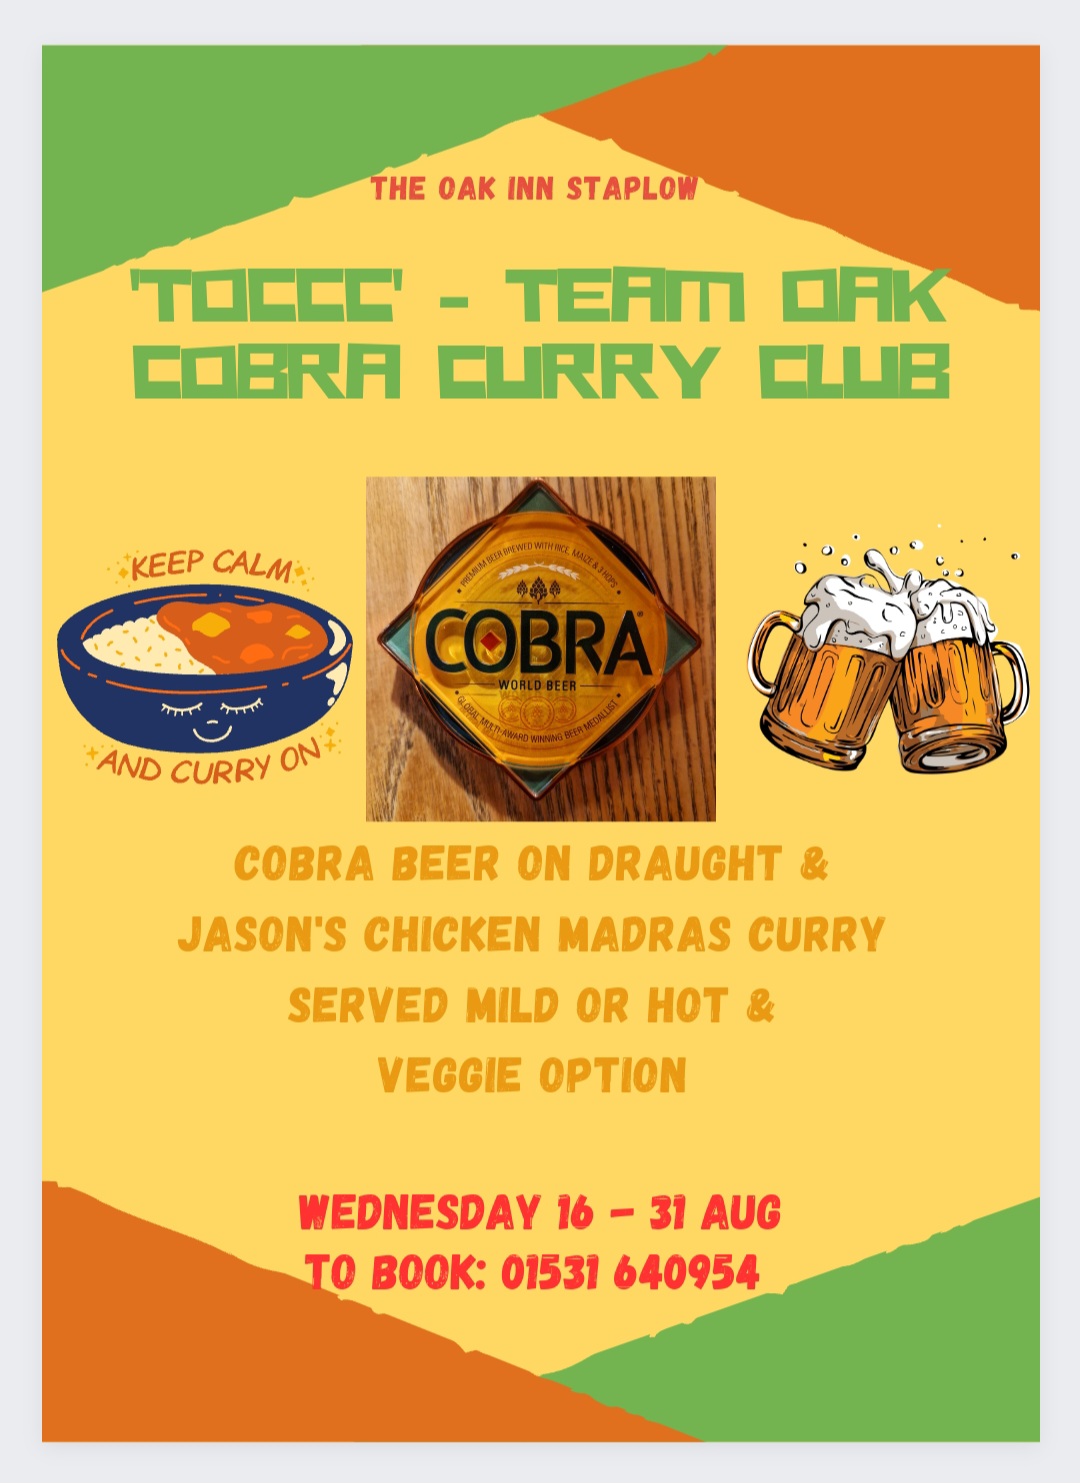 WEDNESDAY, 16 AUGUST 2023 AT 18:00 COBRA & CURRY LAUNCH PARTY The Oak Inn Staplow - Ledbury, Herefordshire